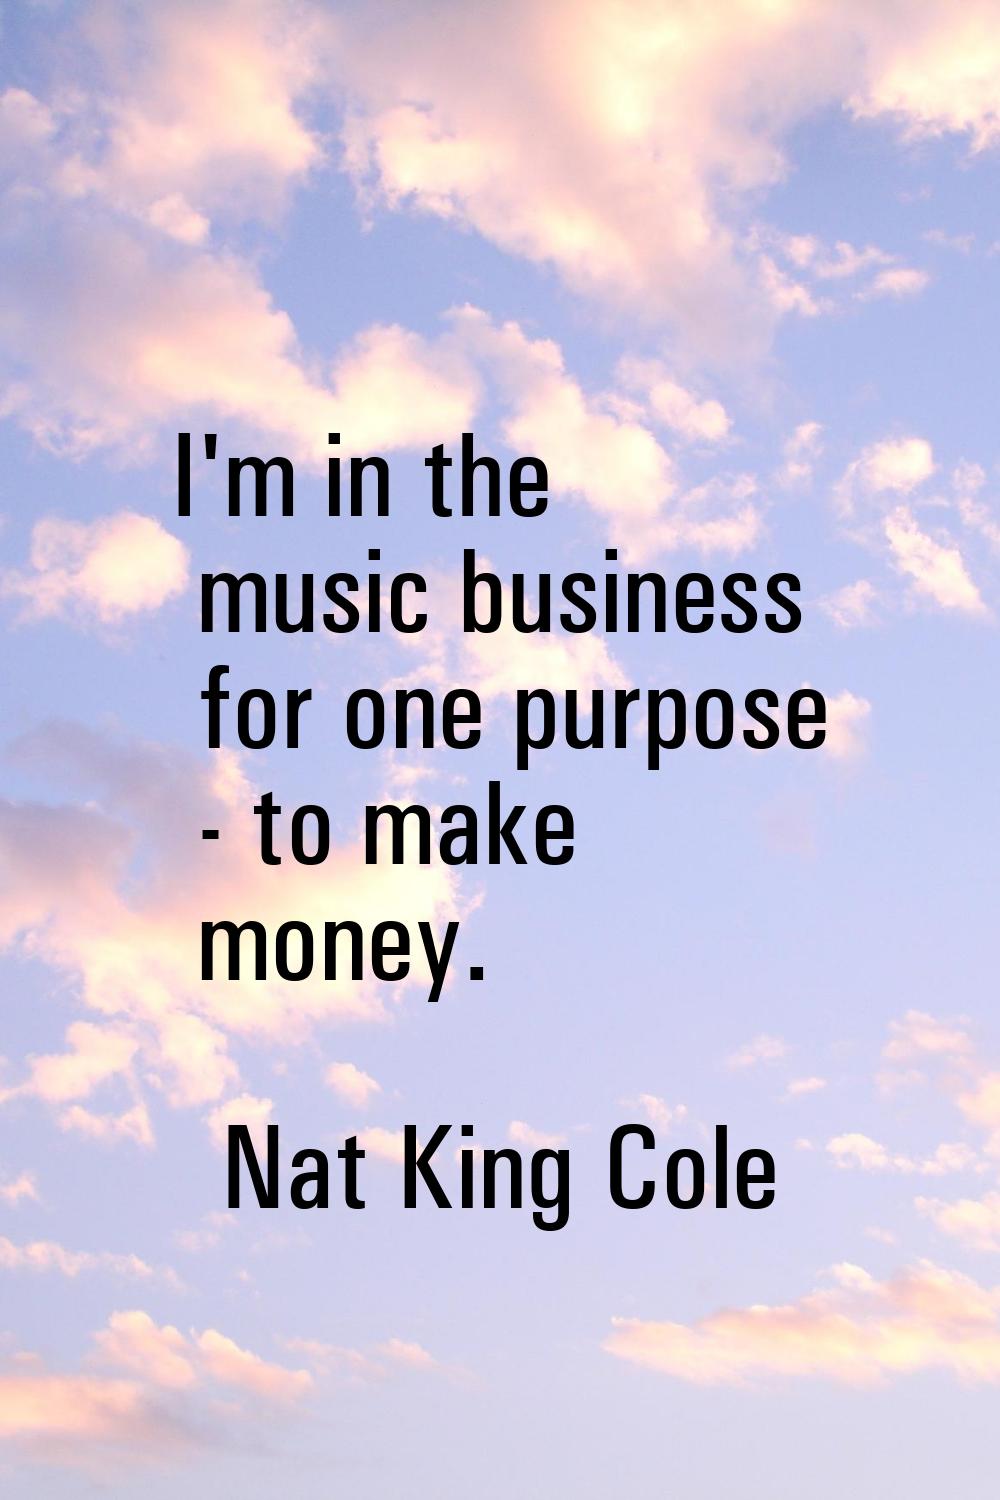 I'm in the music business for one purpose - to make money.